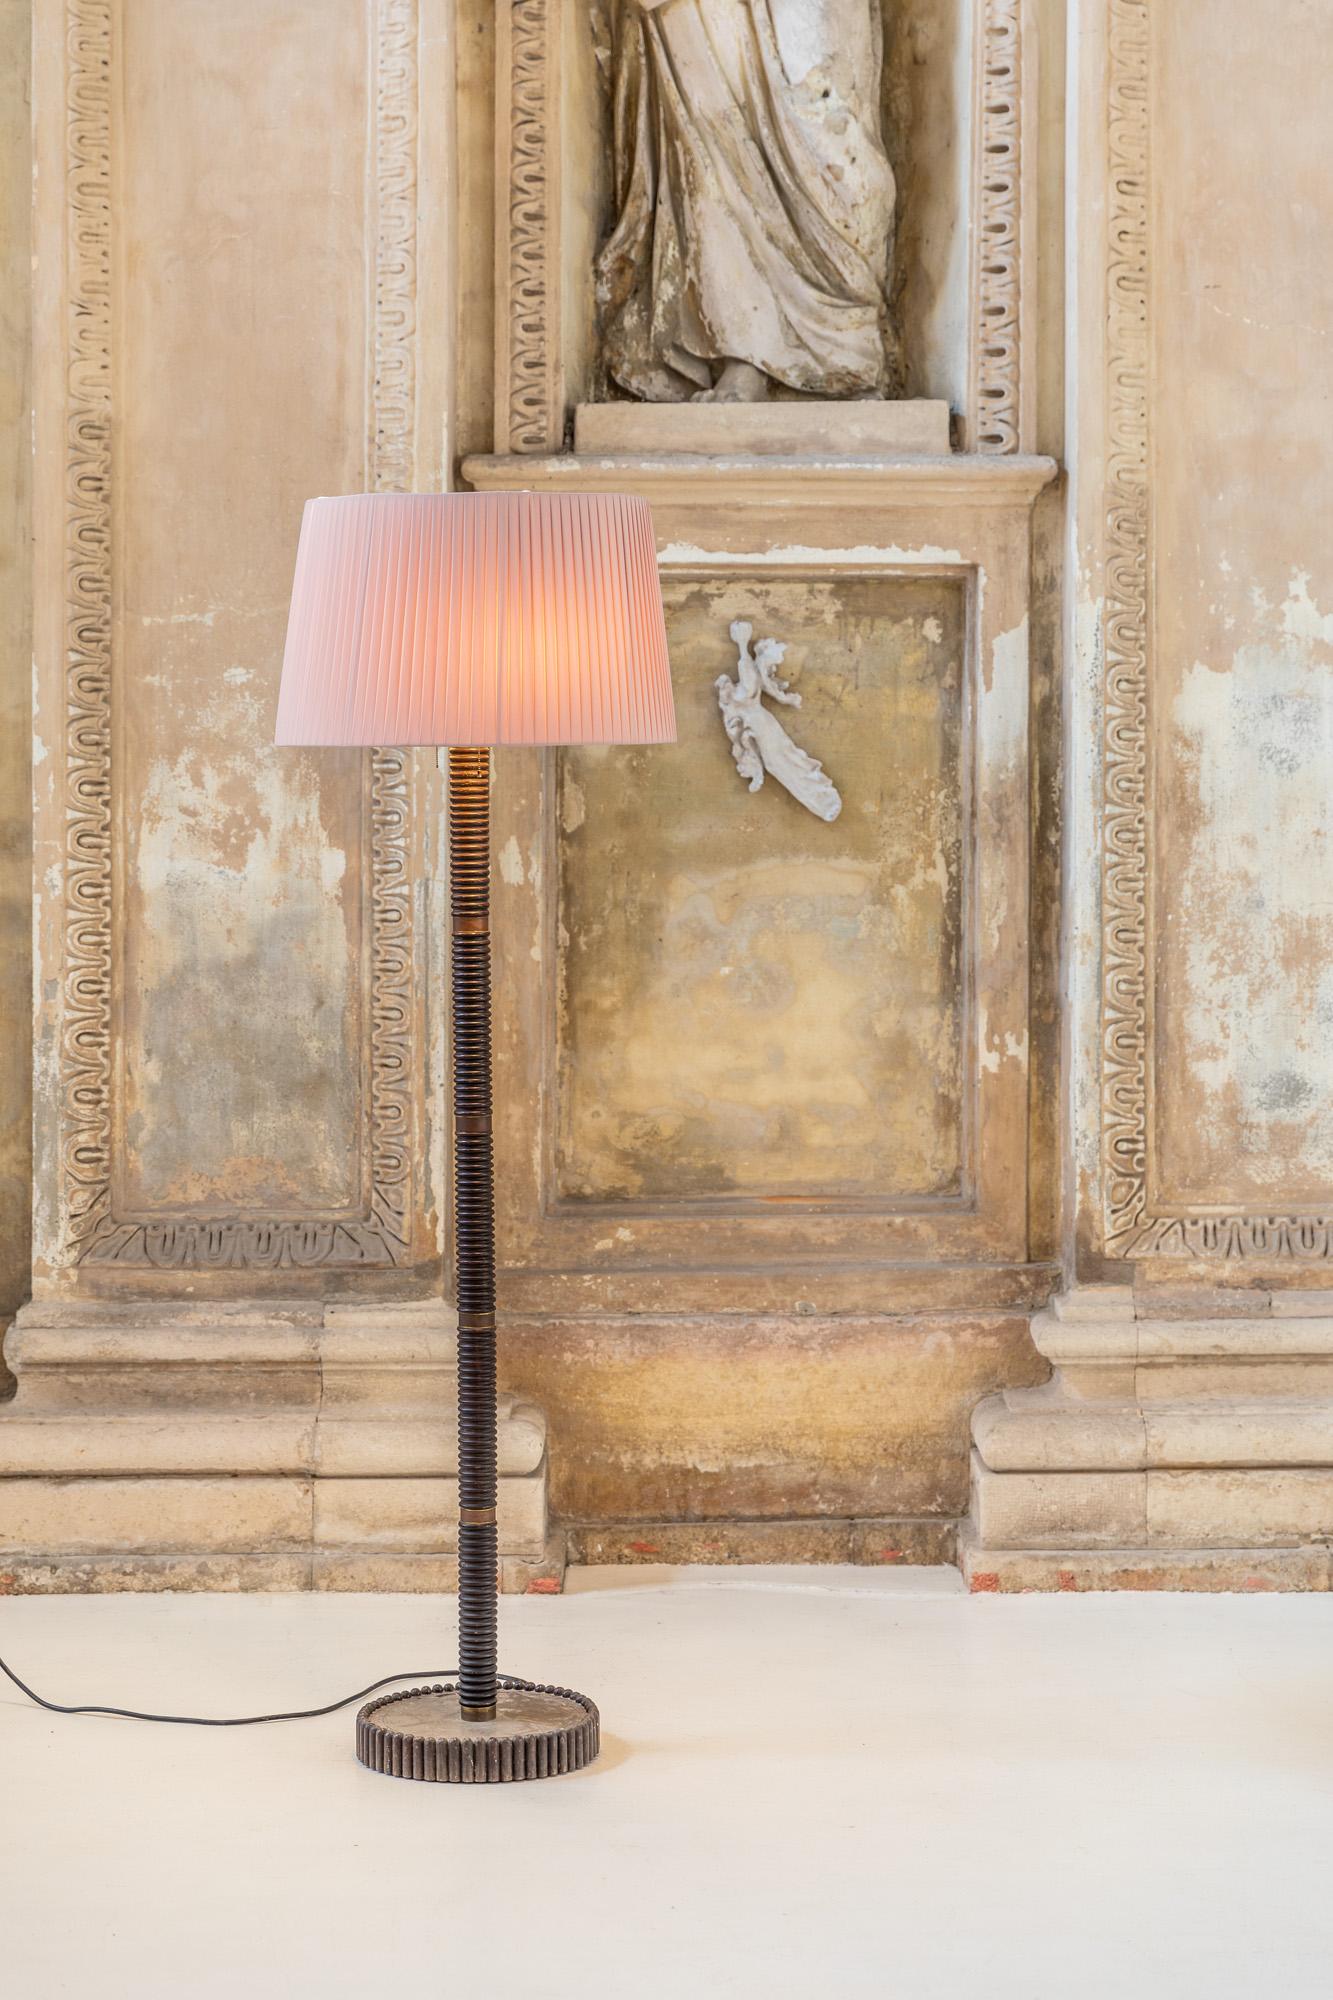 Elegant floor lamp with wood and brass structure, made in Italy in the 40s.
Two bulb lights covers with a pink pleated fabric shade mounted on a finely decorated lamp base and stem.